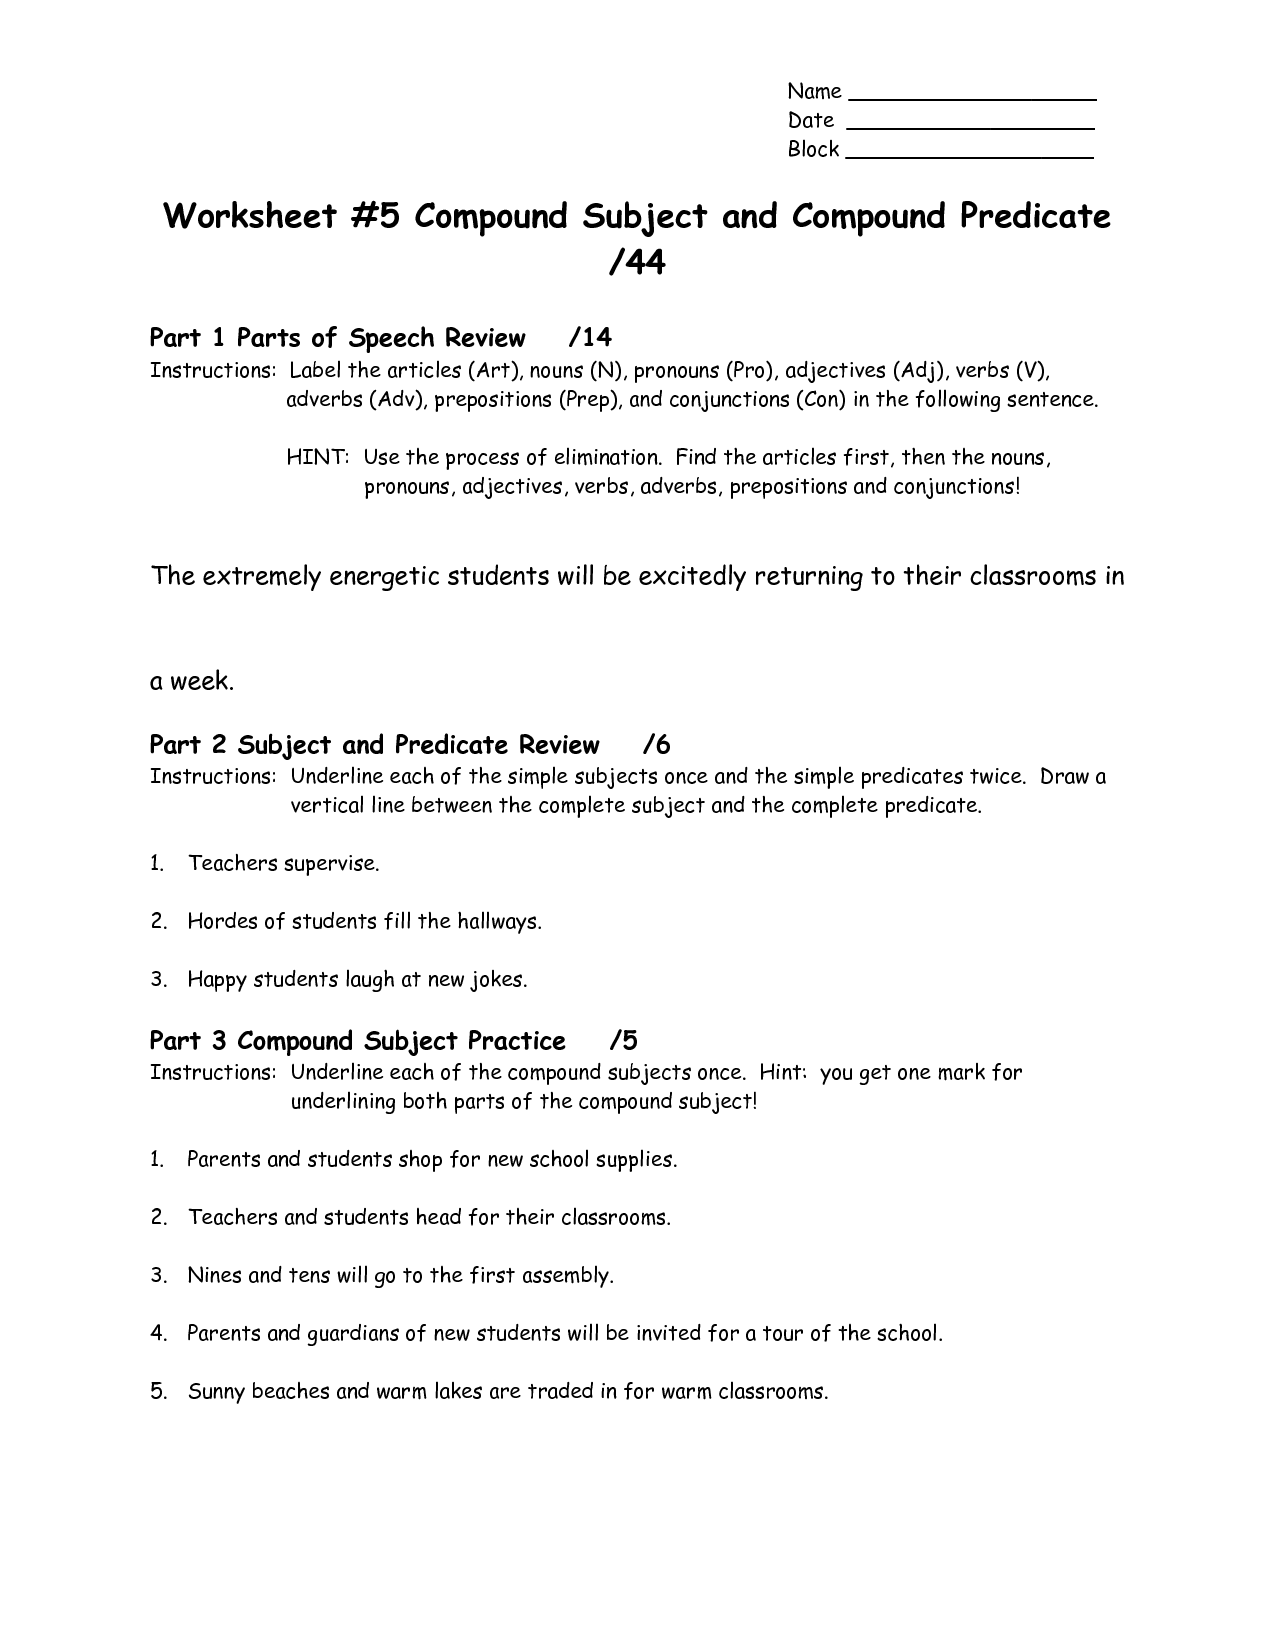 15-best-images-of-simple-and-compound-predicate-worksheets-simple-subject-and-predicate